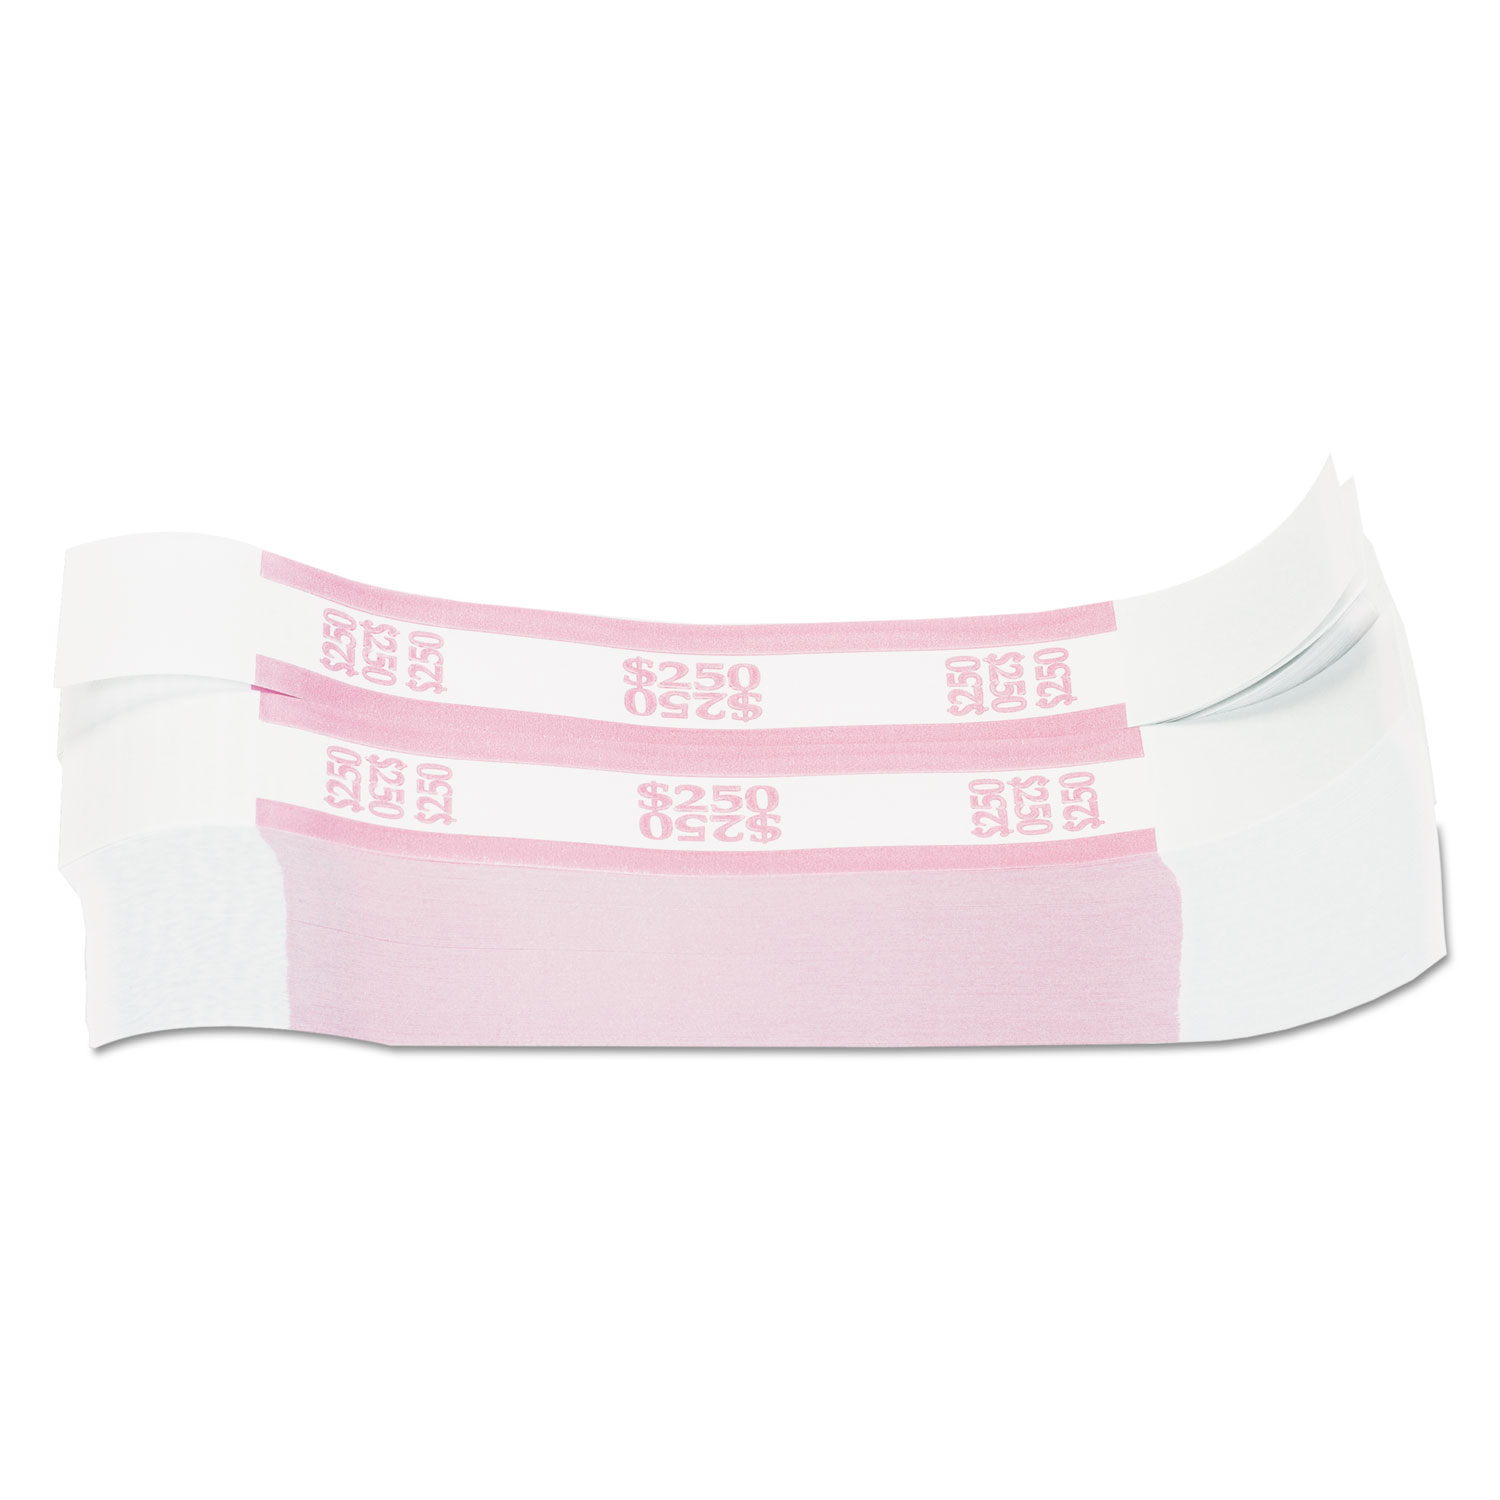  Pap-R Products 216070E13 Currency Straps, Pink, $250 in Dollar Bills, 1000 Bands/Pack (CTX400250) 